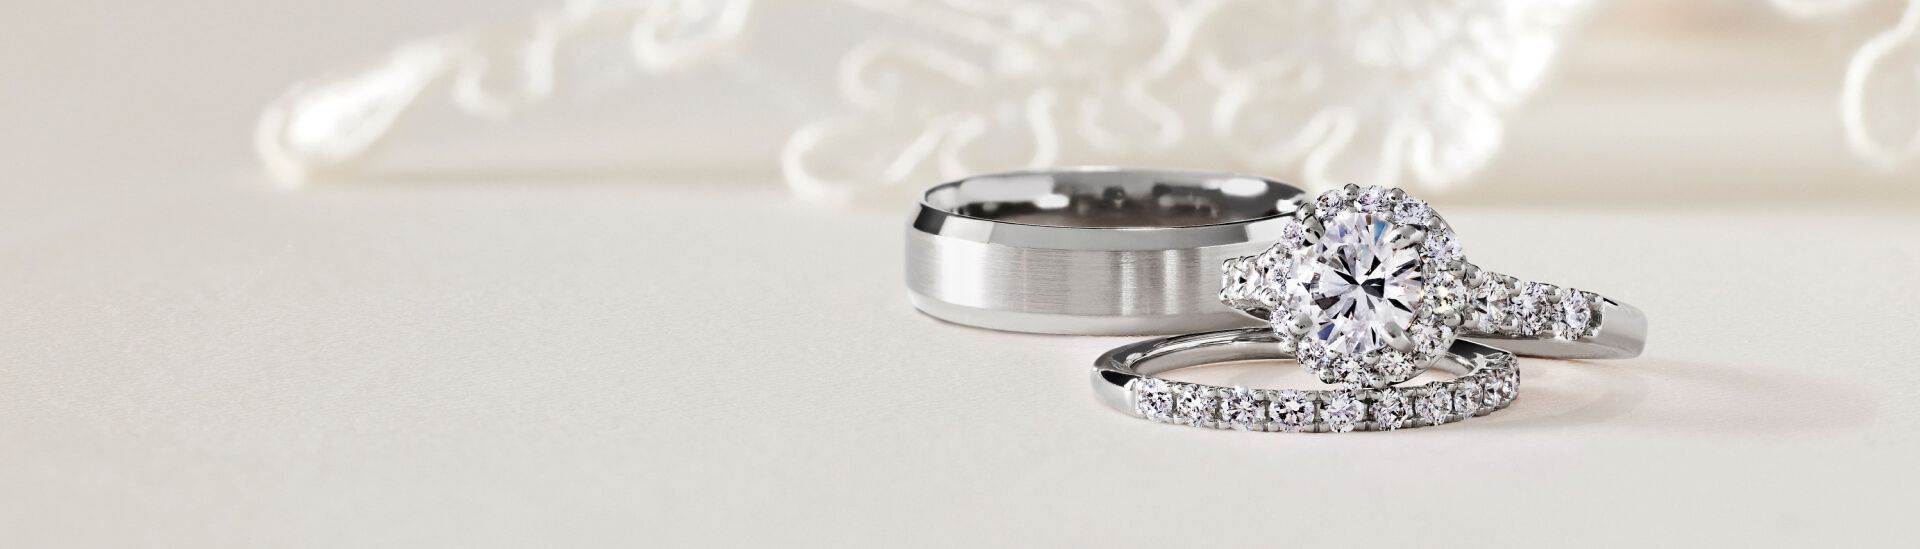 Two diamond rings and a plain metal band on a light background. 